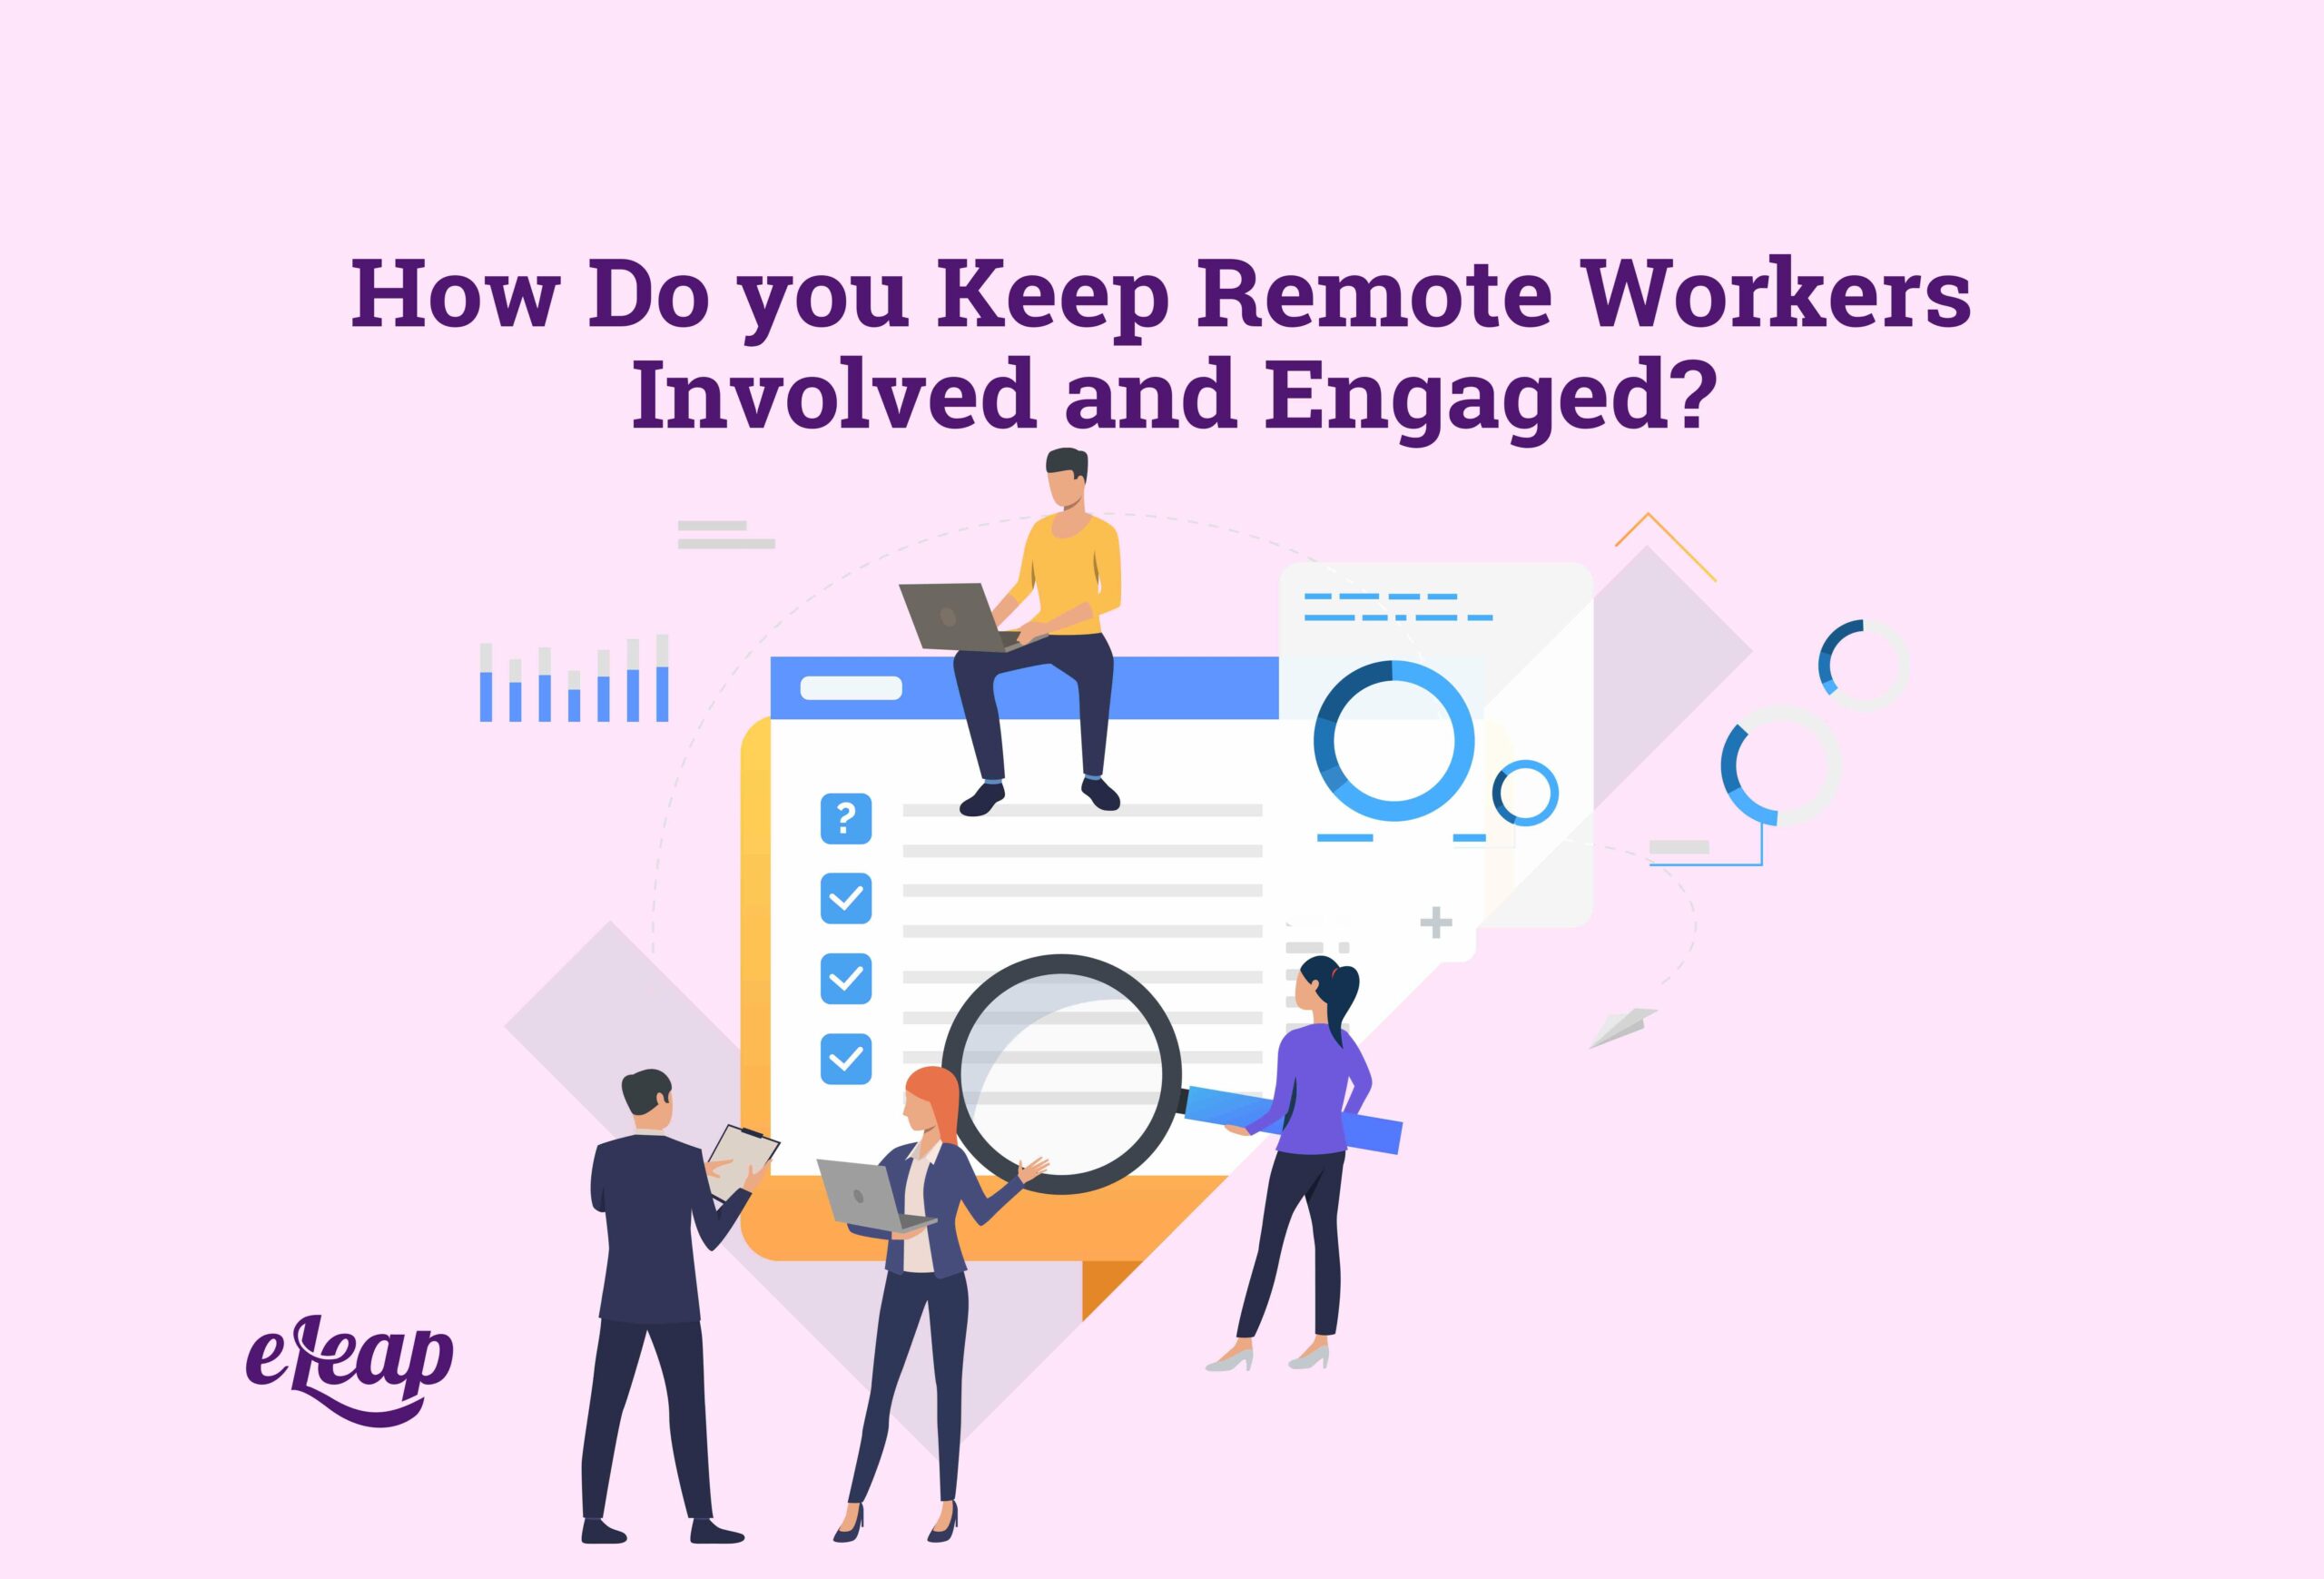 How Do You Keep Remote Workers Involved and Engaged?